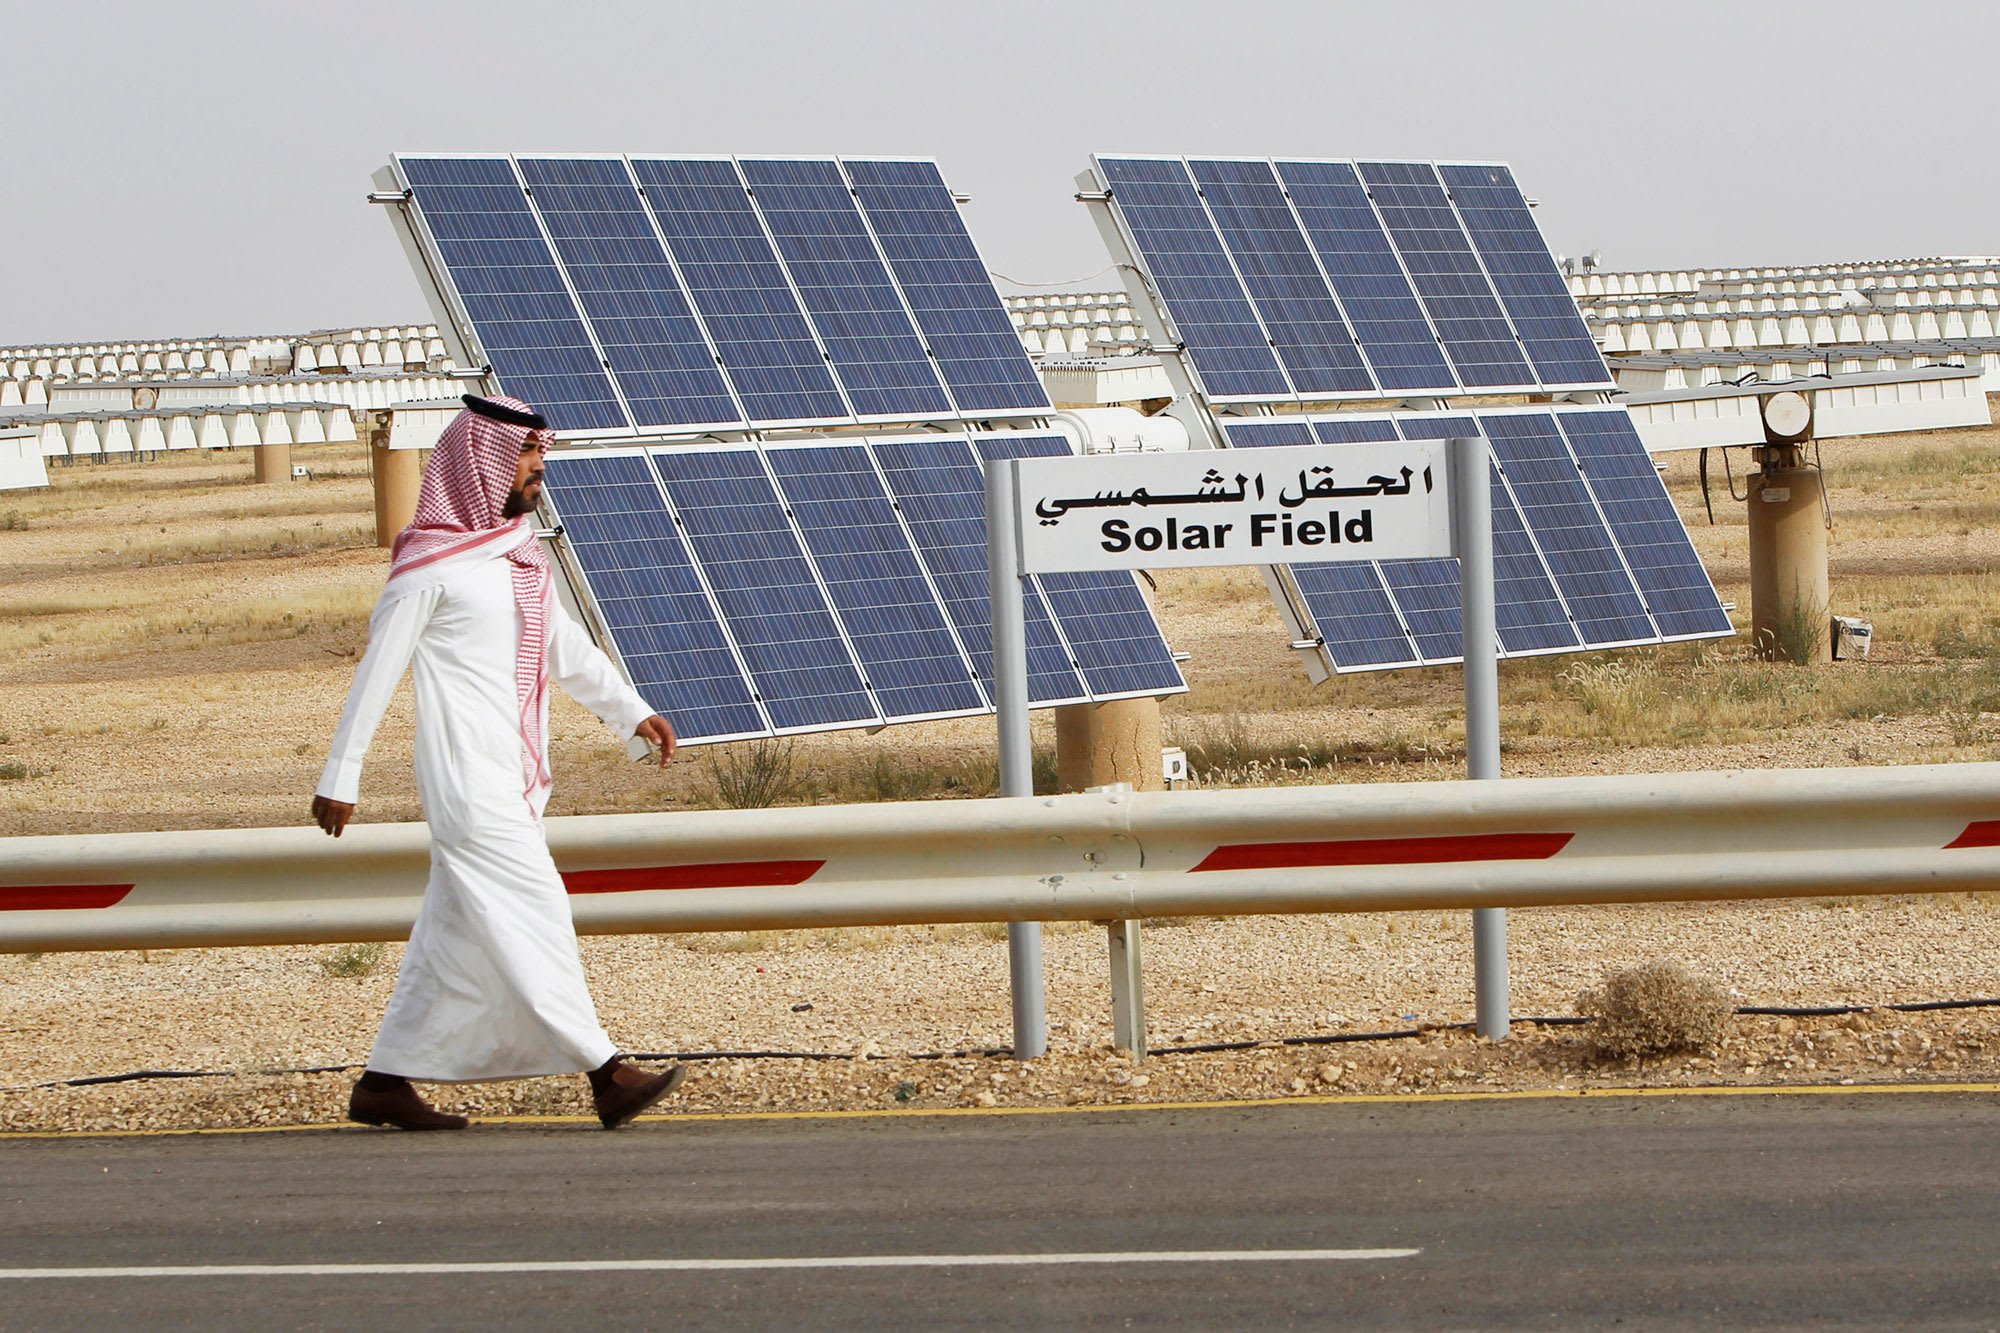 Saudi Arabia Vision 2030: Solar energy can complement, not rival, oil and gas